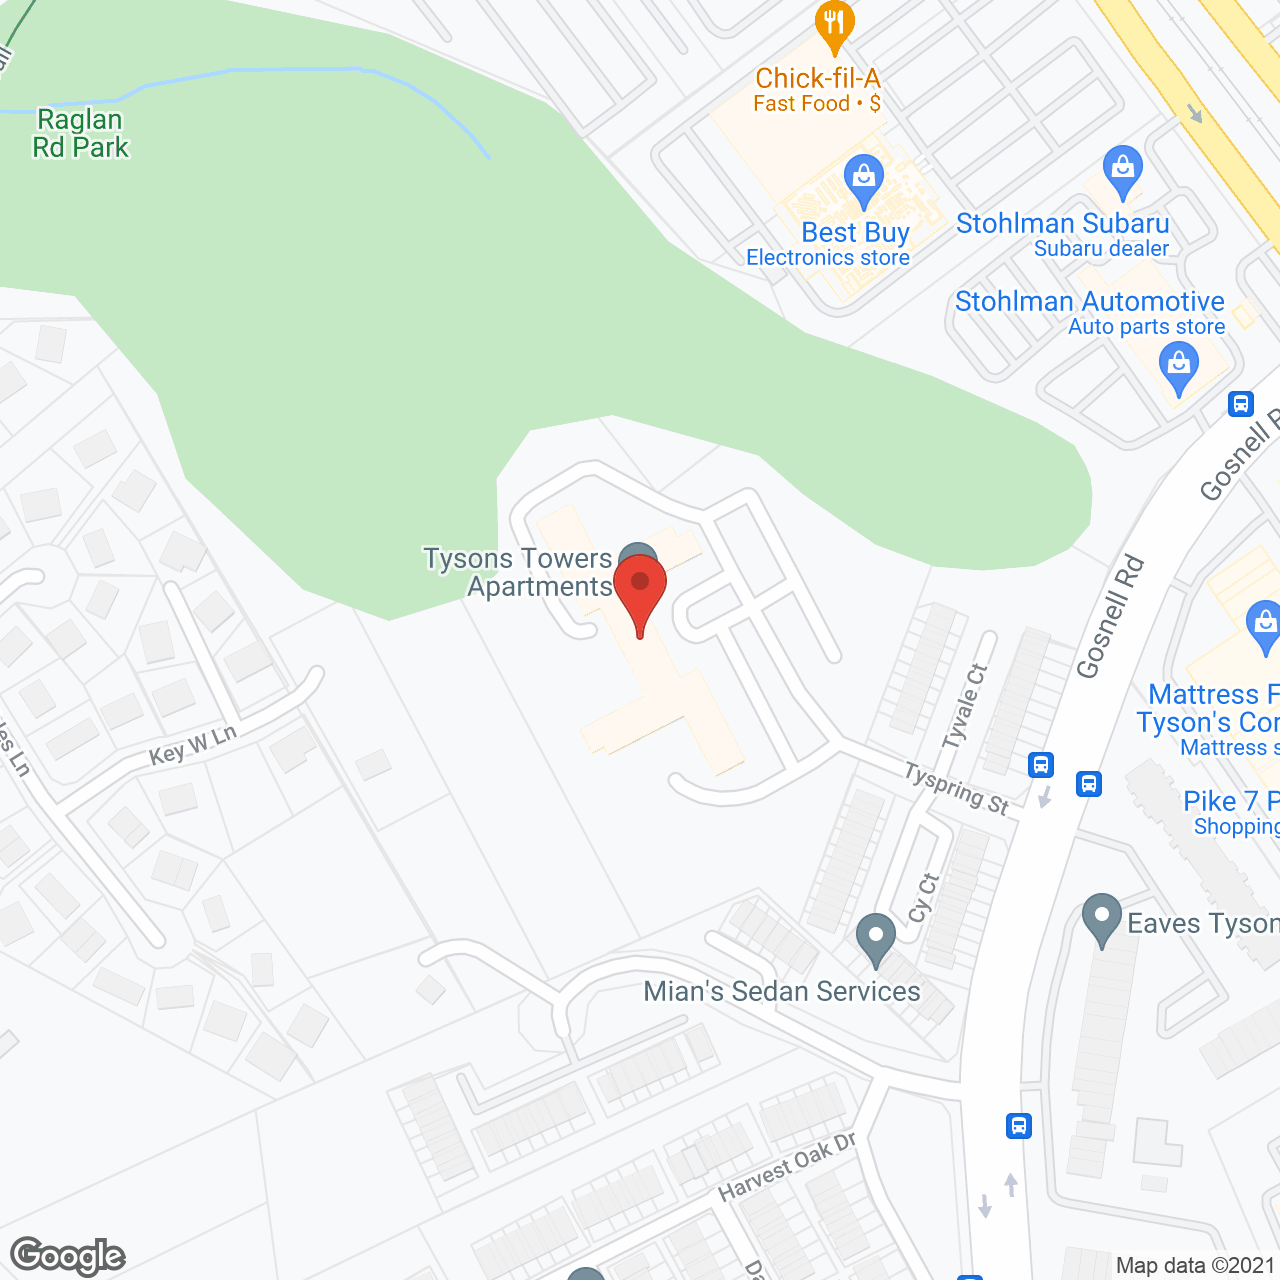 Tysons Towers in google map